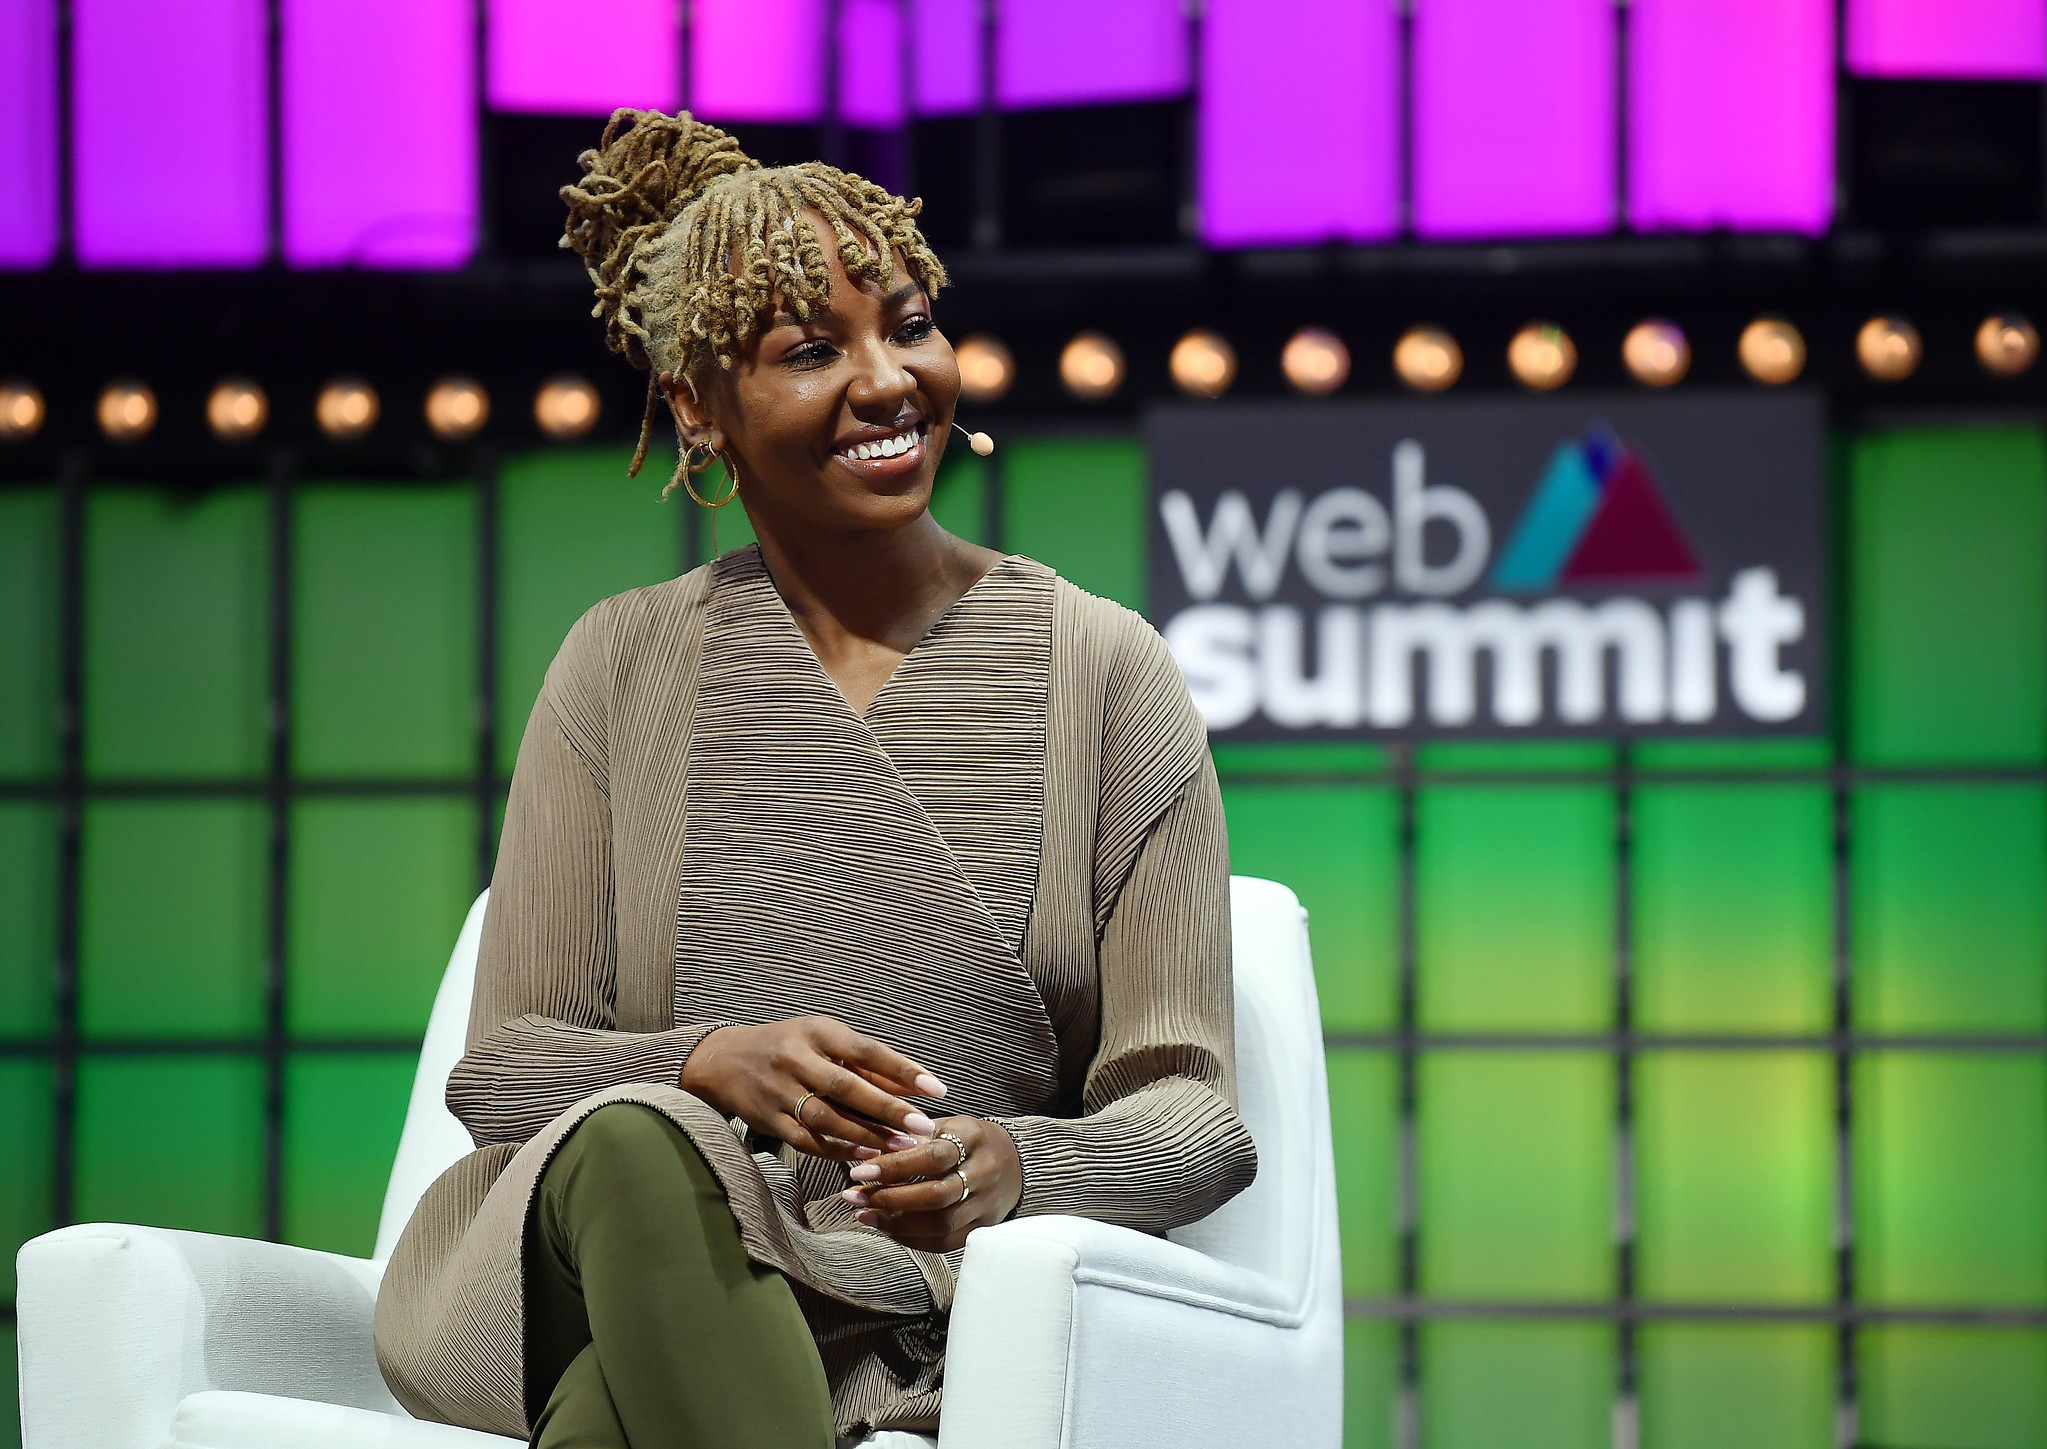 Photograph of a person (Ayọ Tometi, co-founder of Black Lives Matter) speaking on Centre Stage at Web Summit. The person is sitting on a chair and smiling. The Web Summit logo appears in the background.